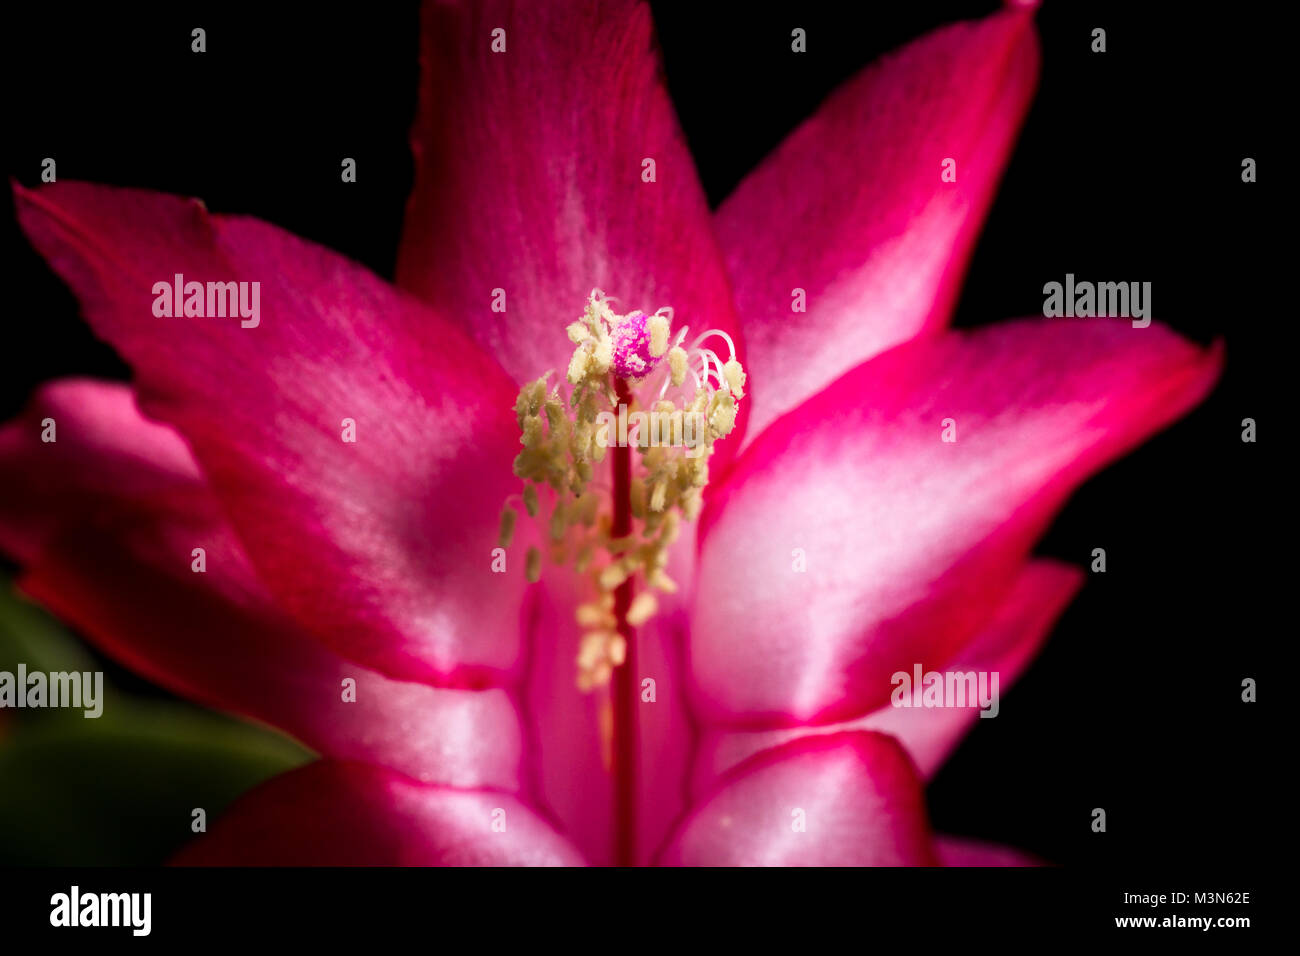 close up of a christmas cactus bloom on a dark background Stock Photo